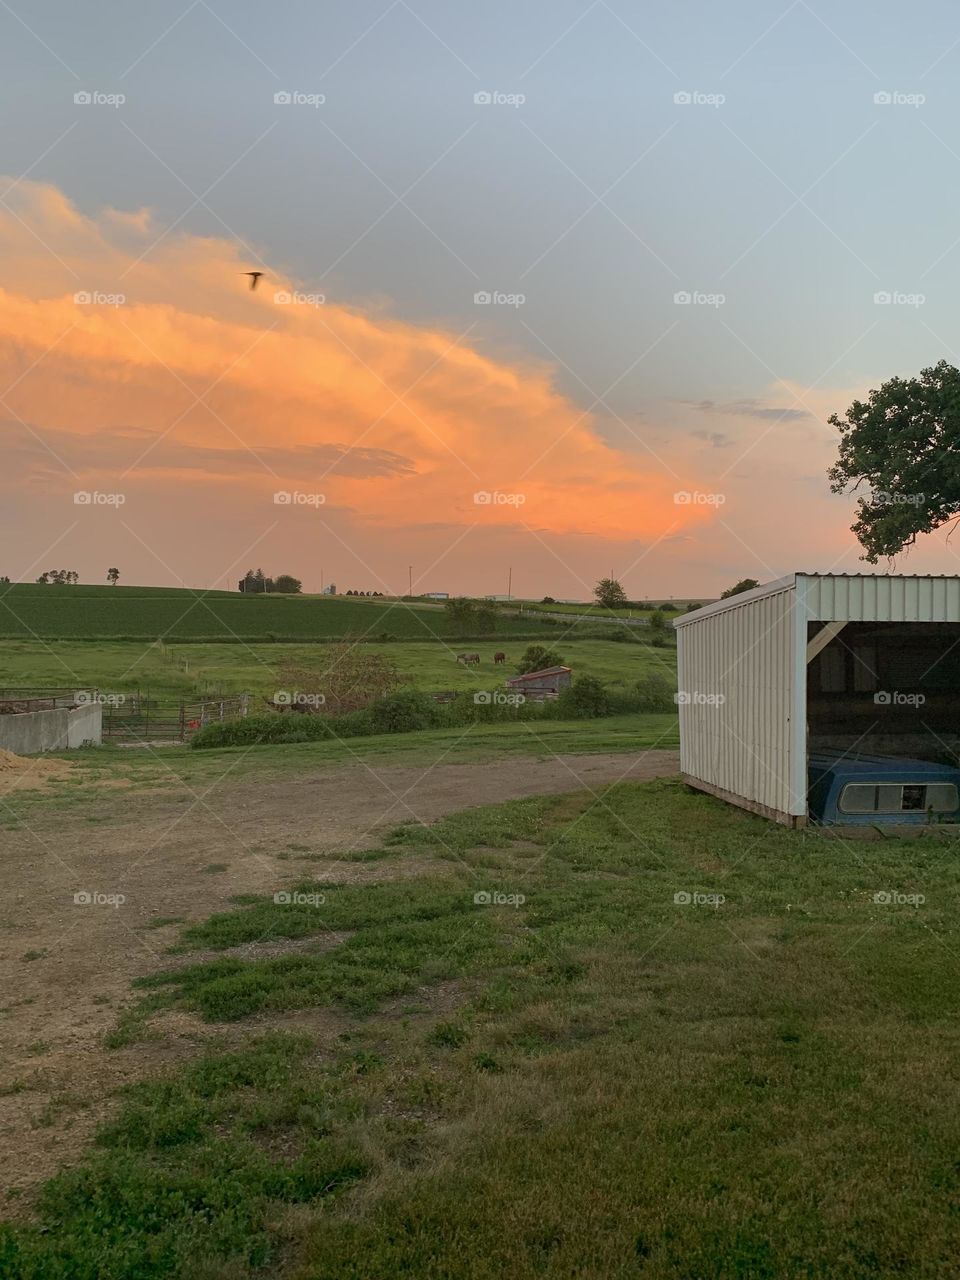 Sunset on the farm showing the horizon